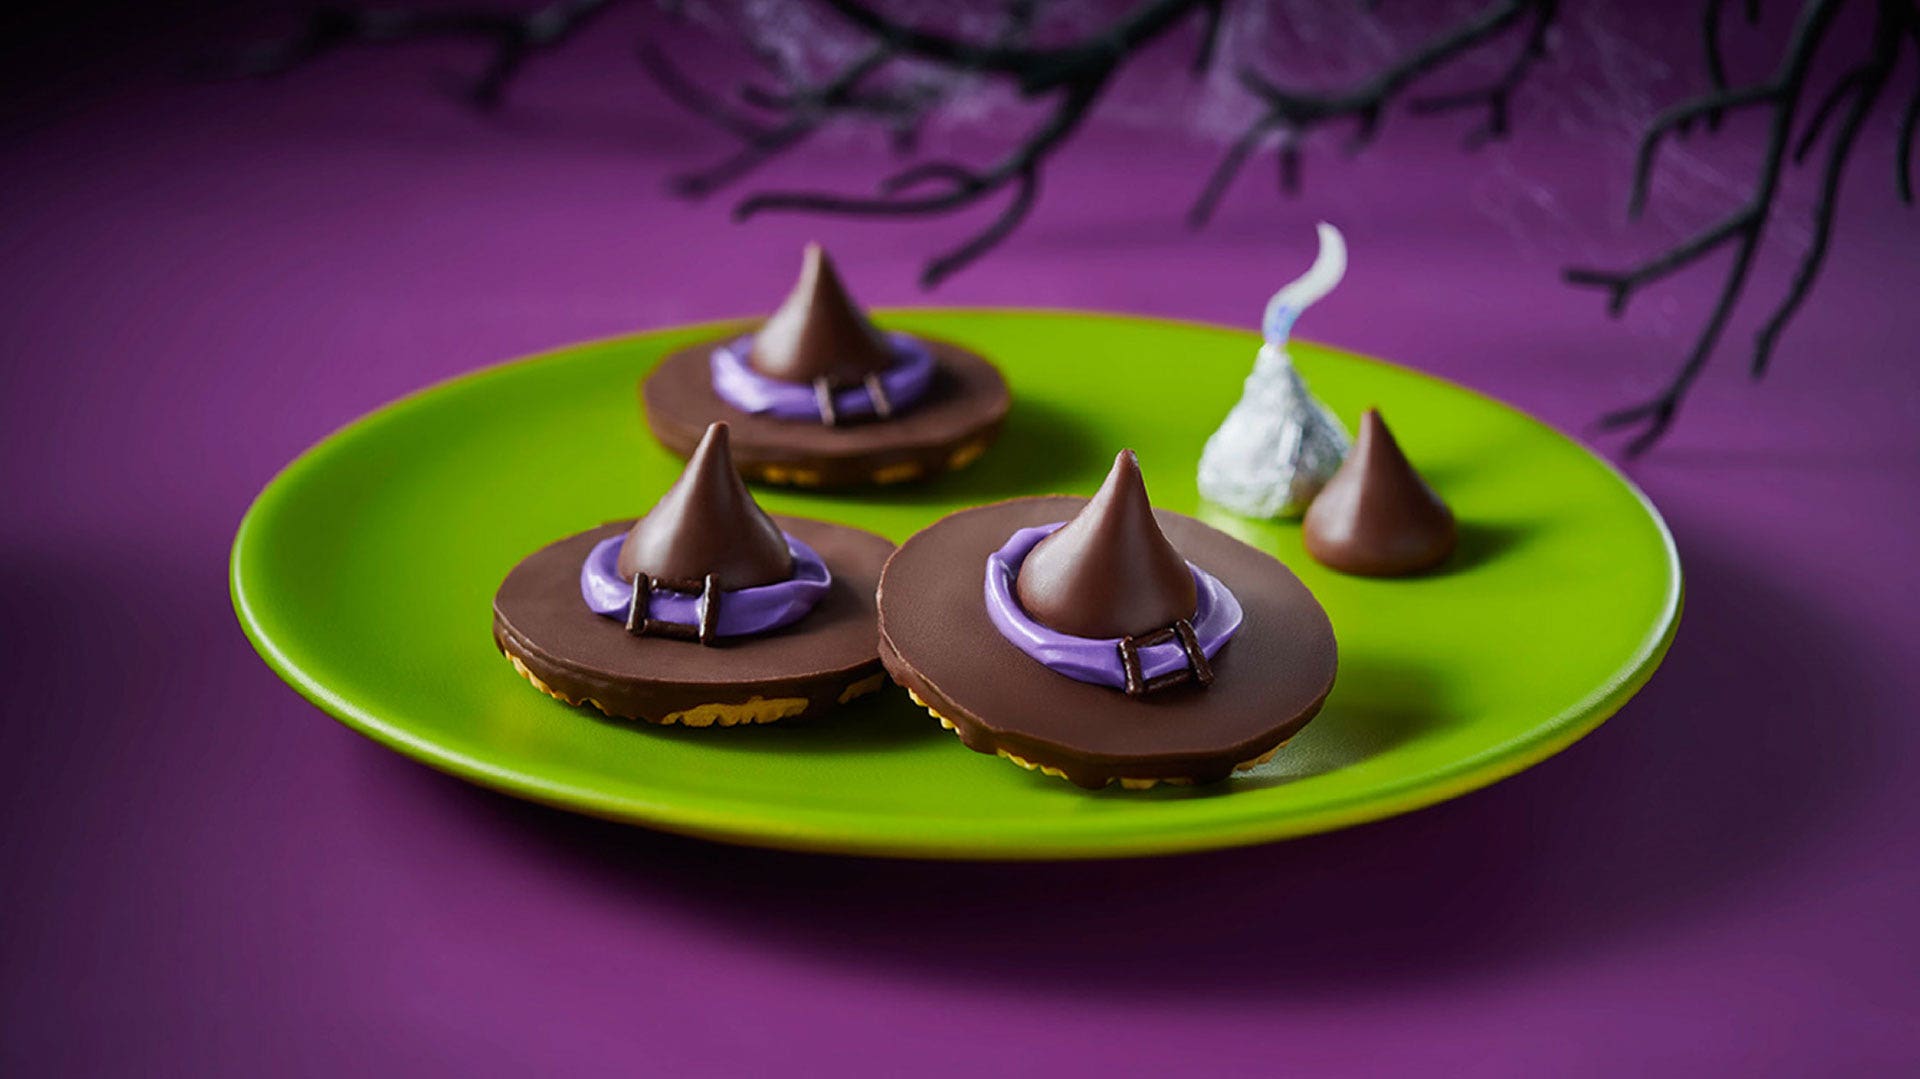 A fudge striped cookie and a Hershey's kiss make this super simple Halloween party snack spooky and delicious.